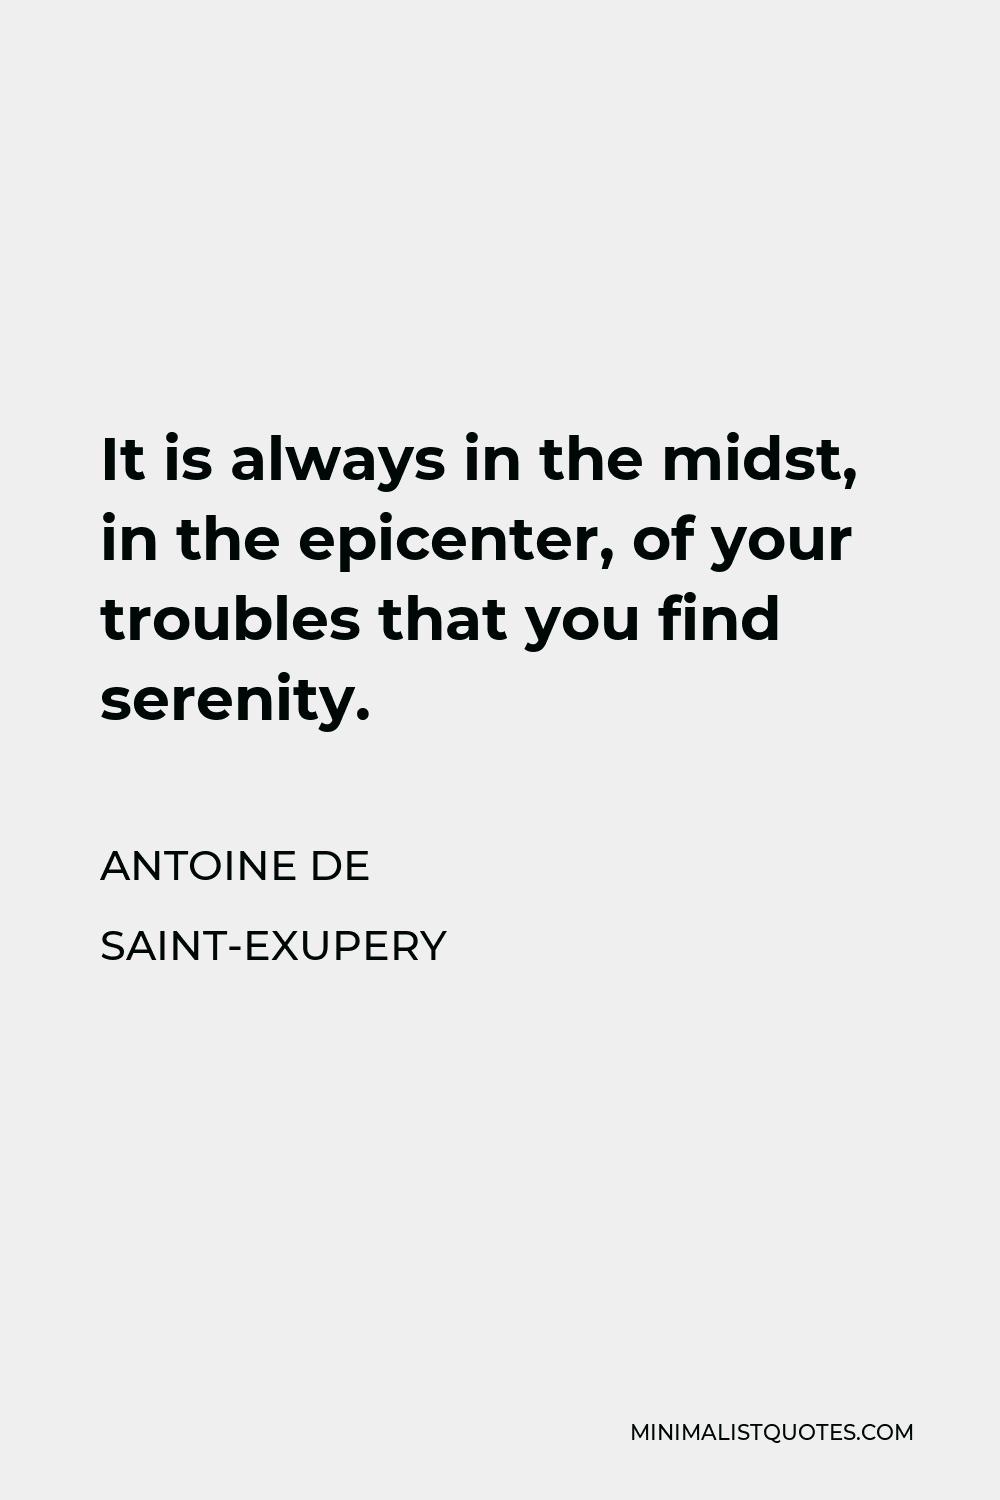 Antoine de Saint-Exupery Quote - It is always in the midst, in the epicenter, of your troubles that you find serenity.